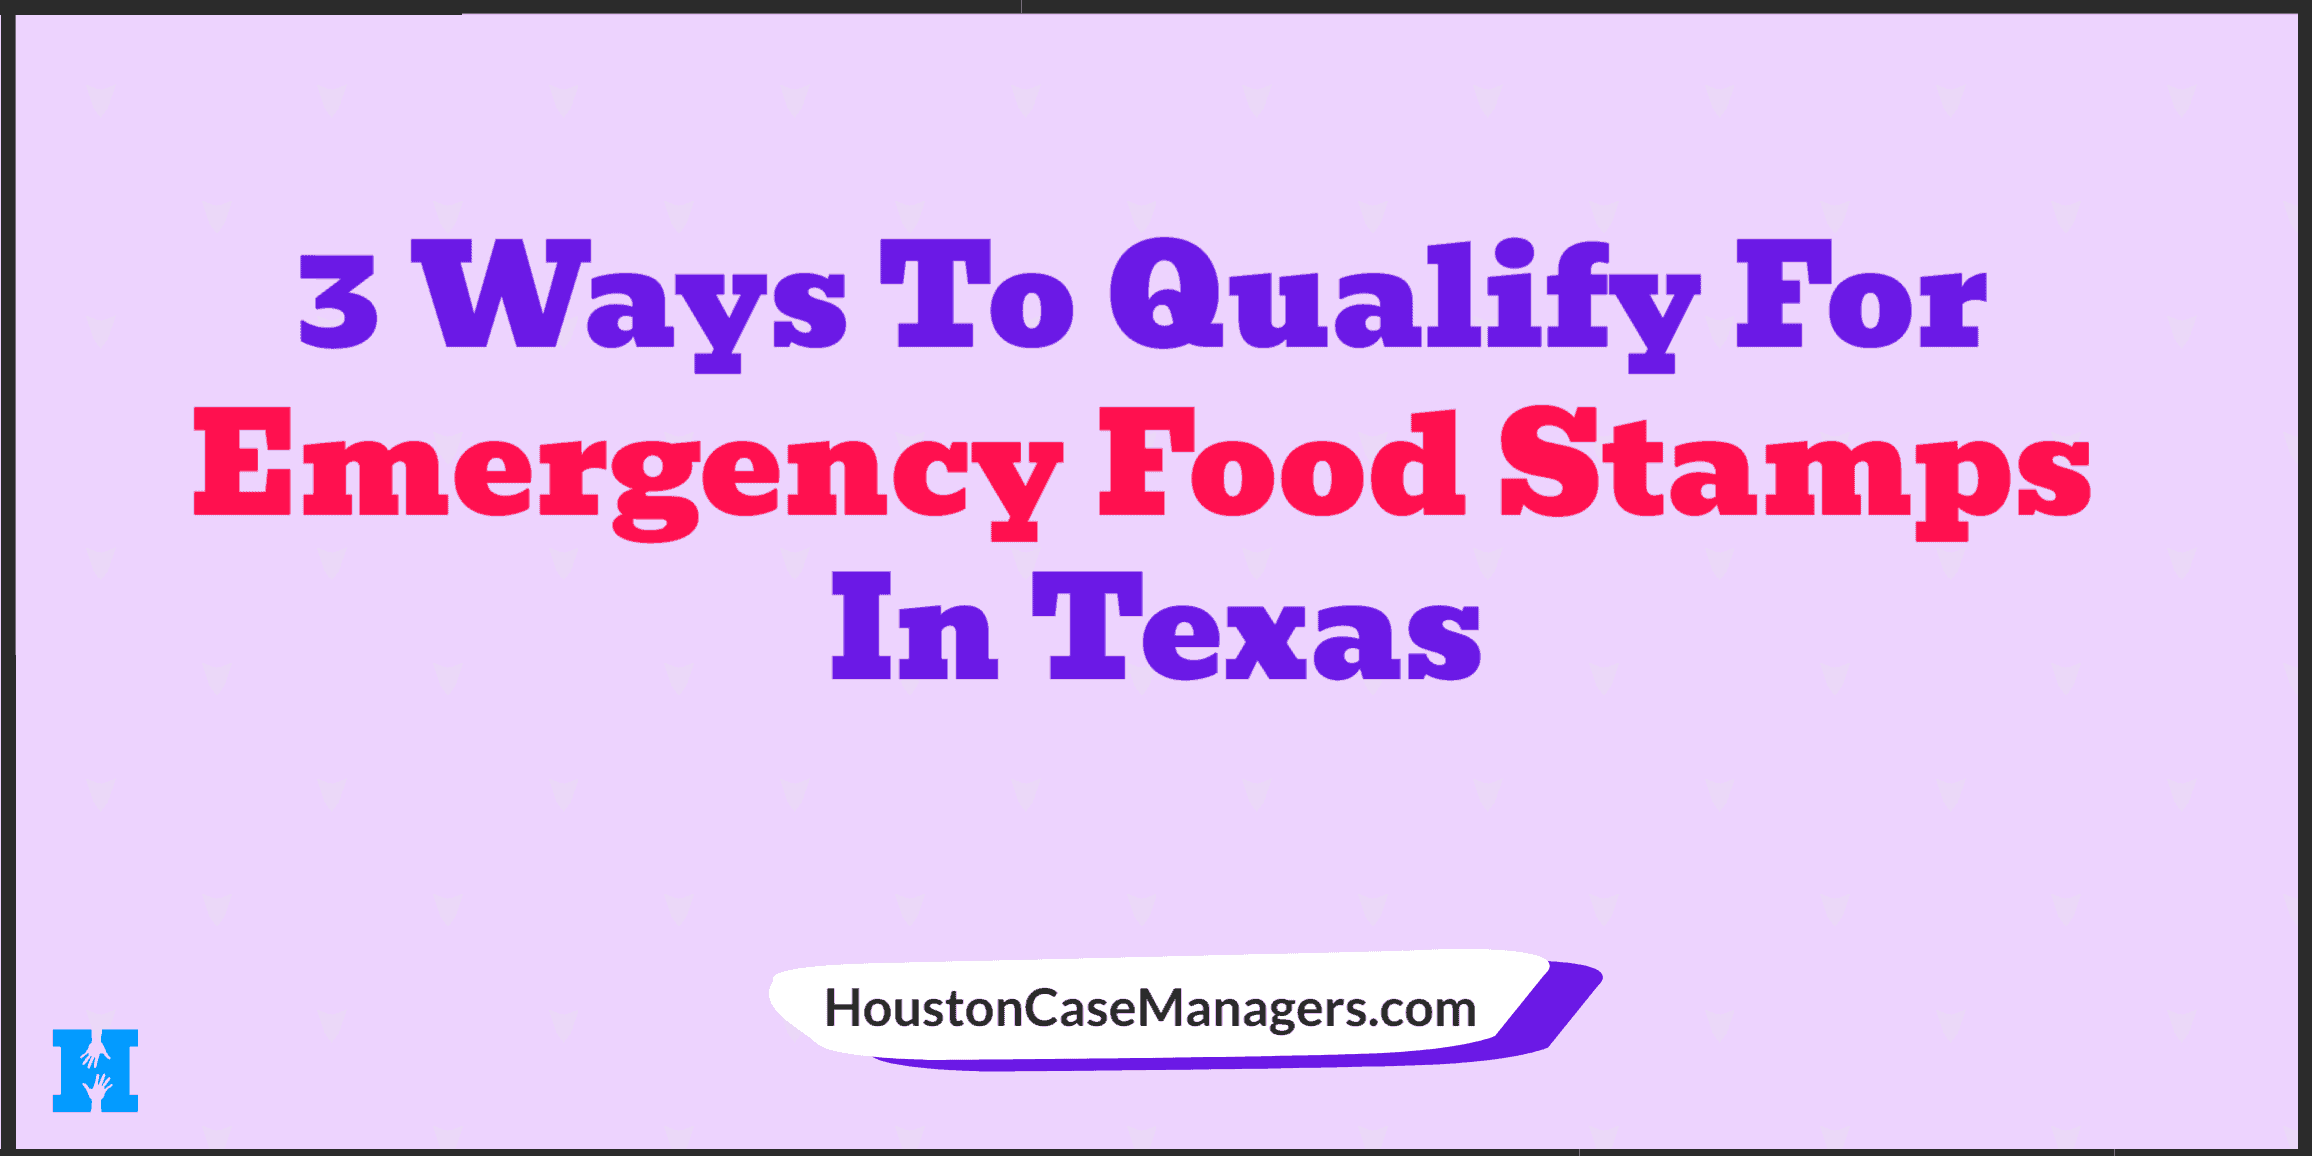 3 Ways To Qualify For Emergency Food Stamps In Texas